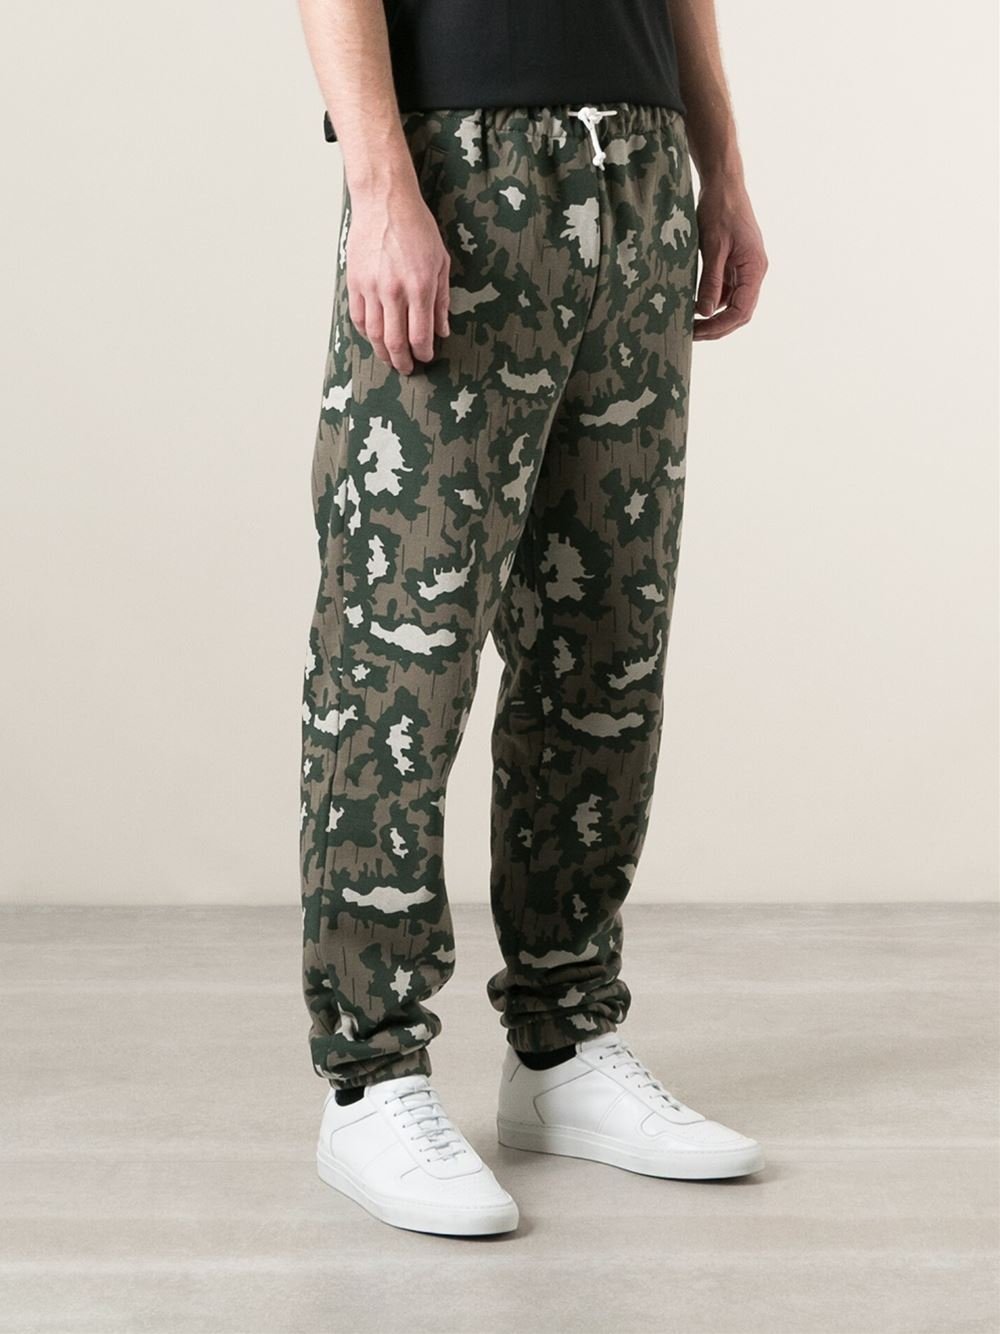 Lyst - Adidas Camouflage Track Pants in Green for Men